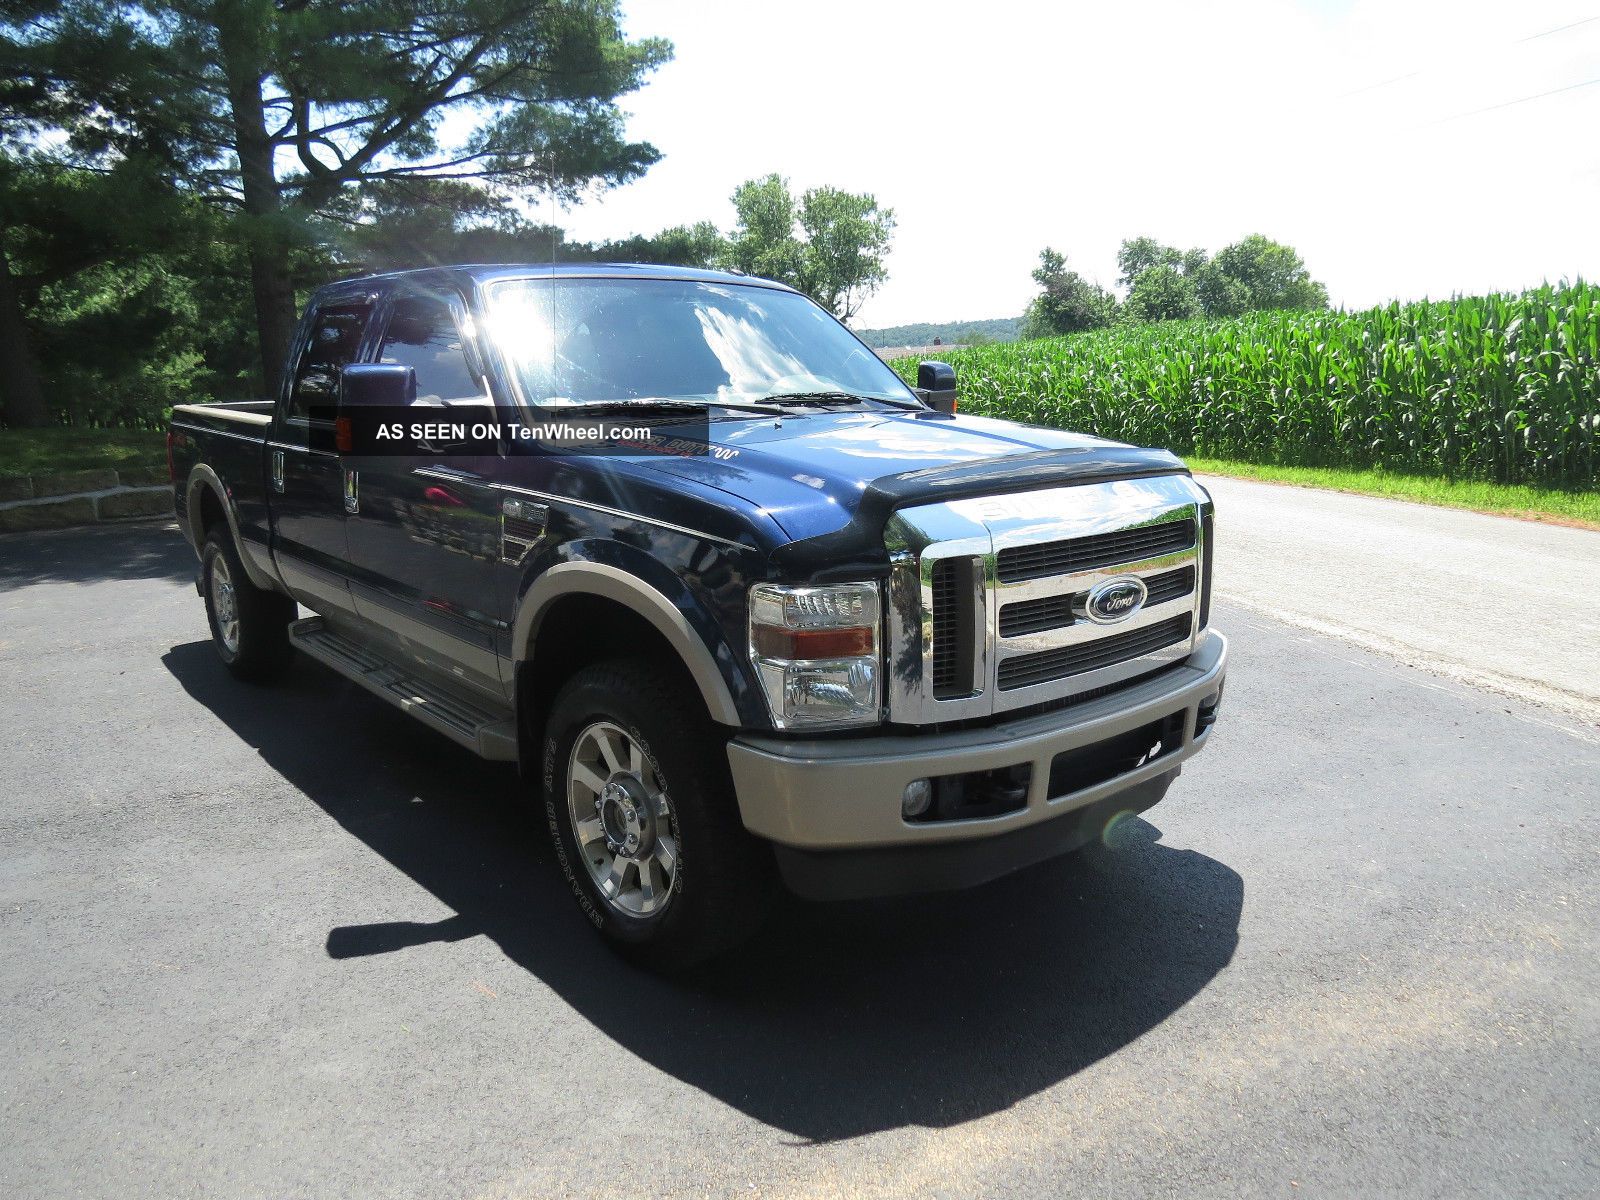 2009 Ford f350 king ranch specs #2